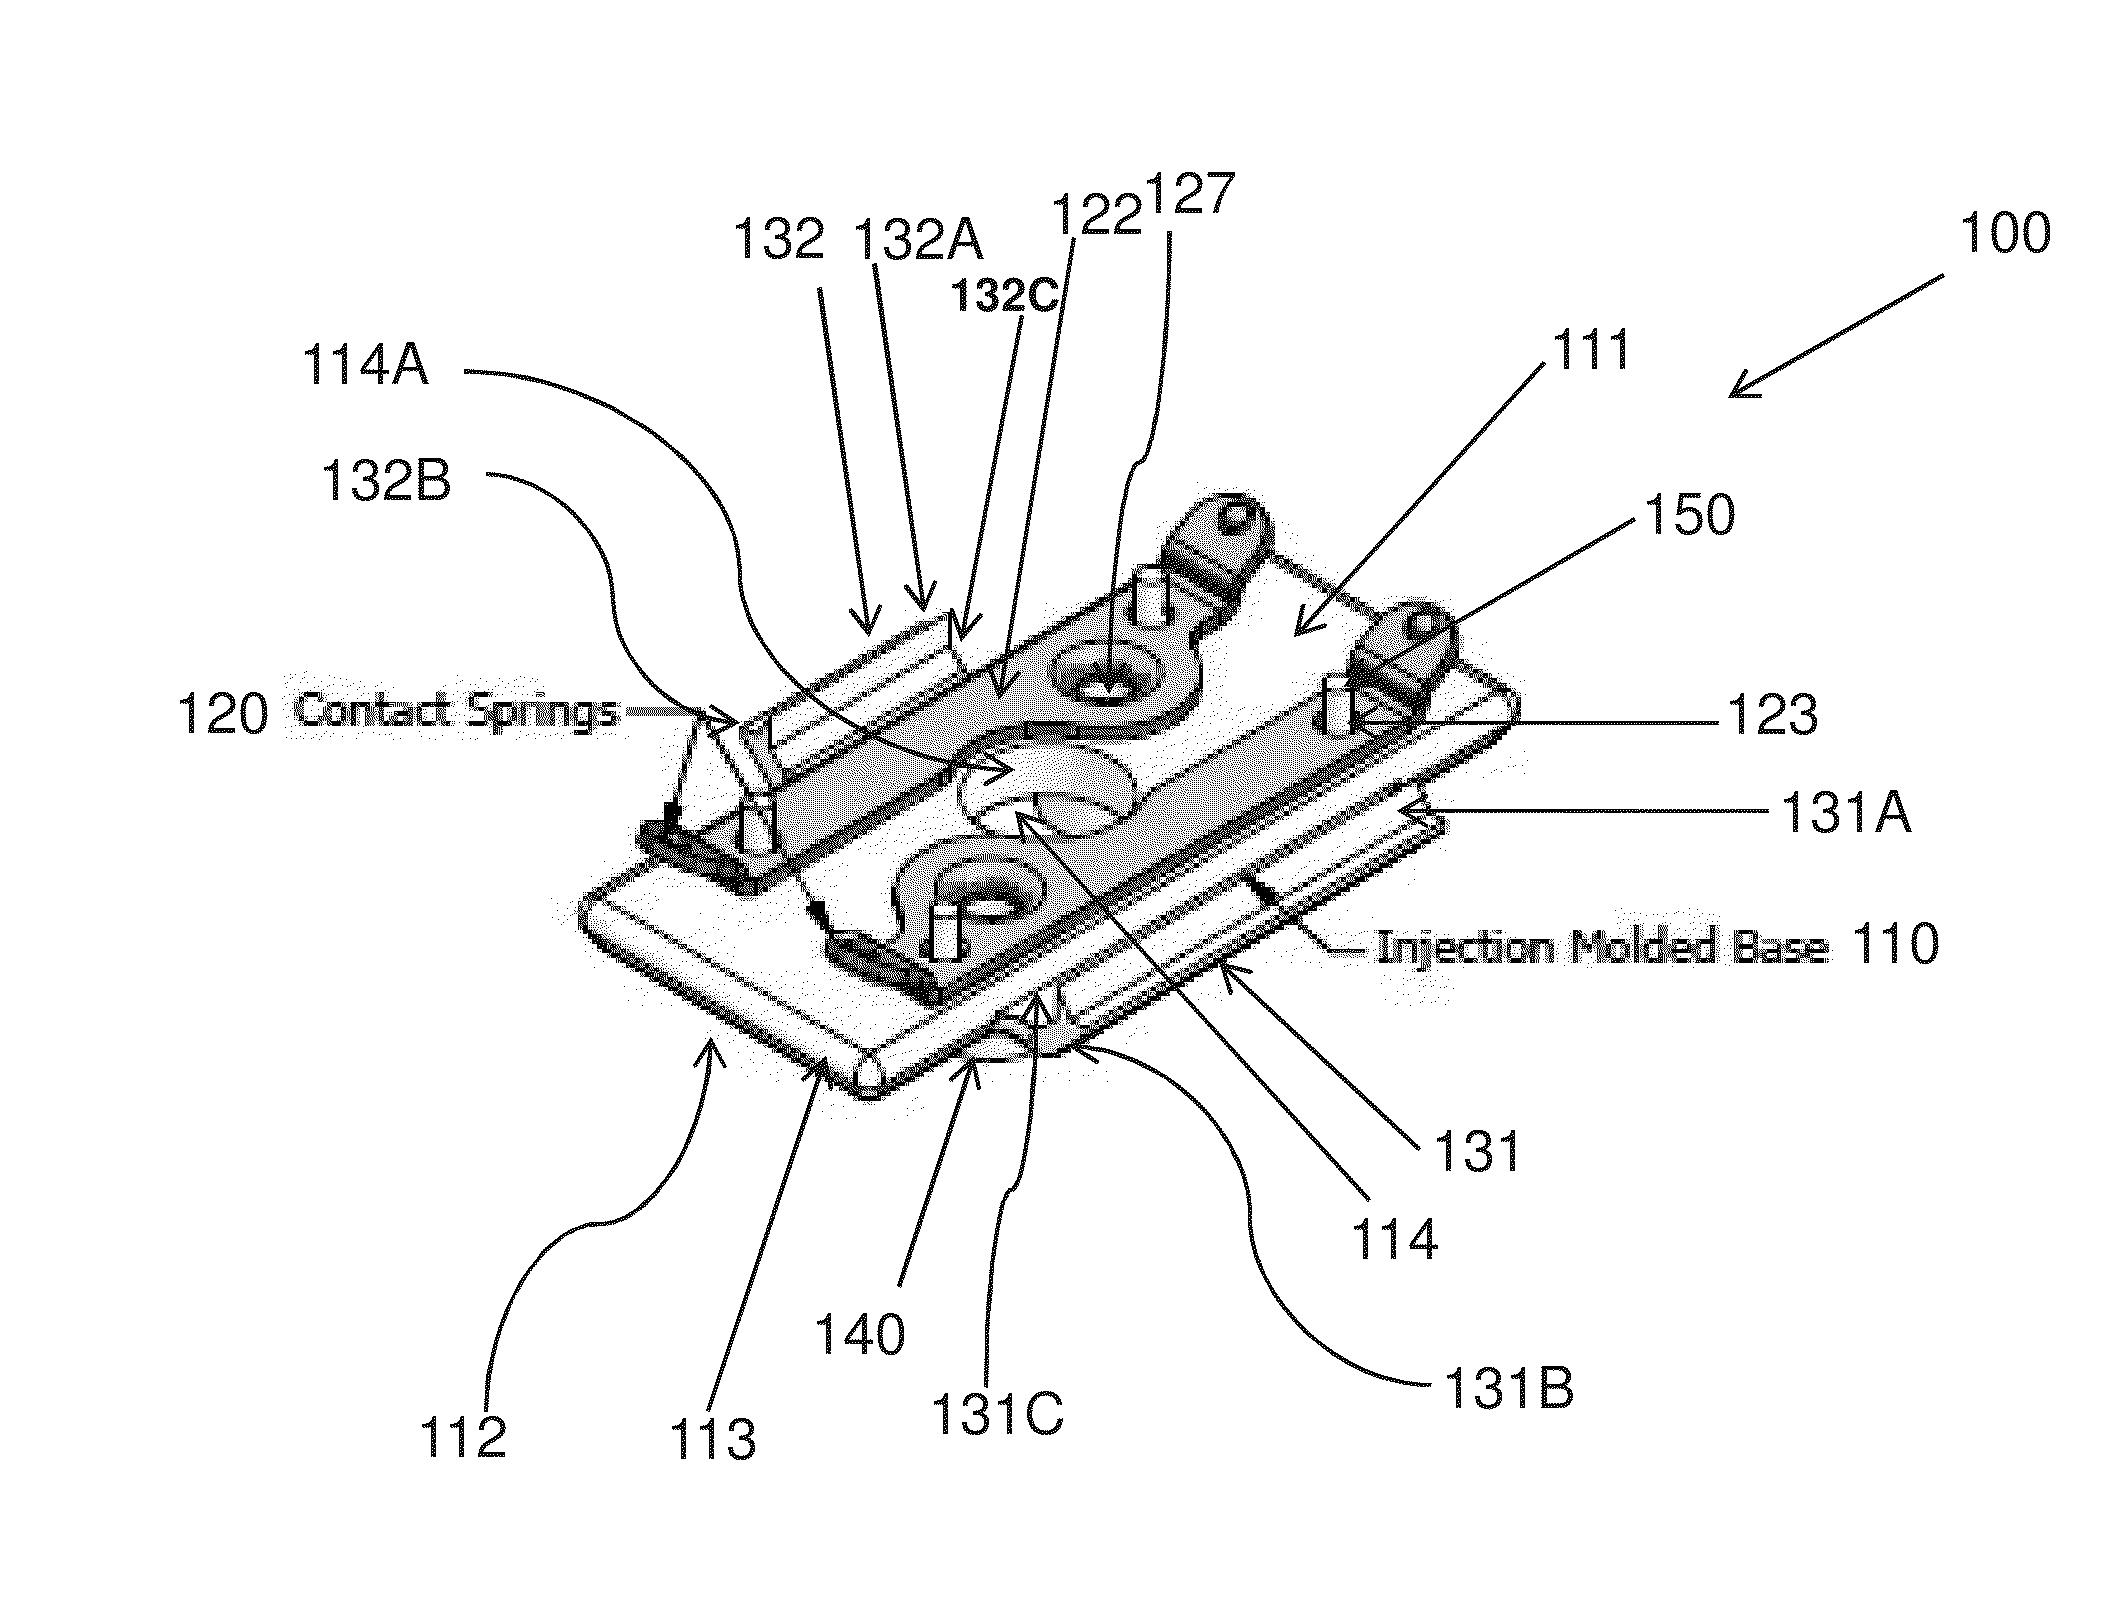 Systems and methods for assembling LED connector boards